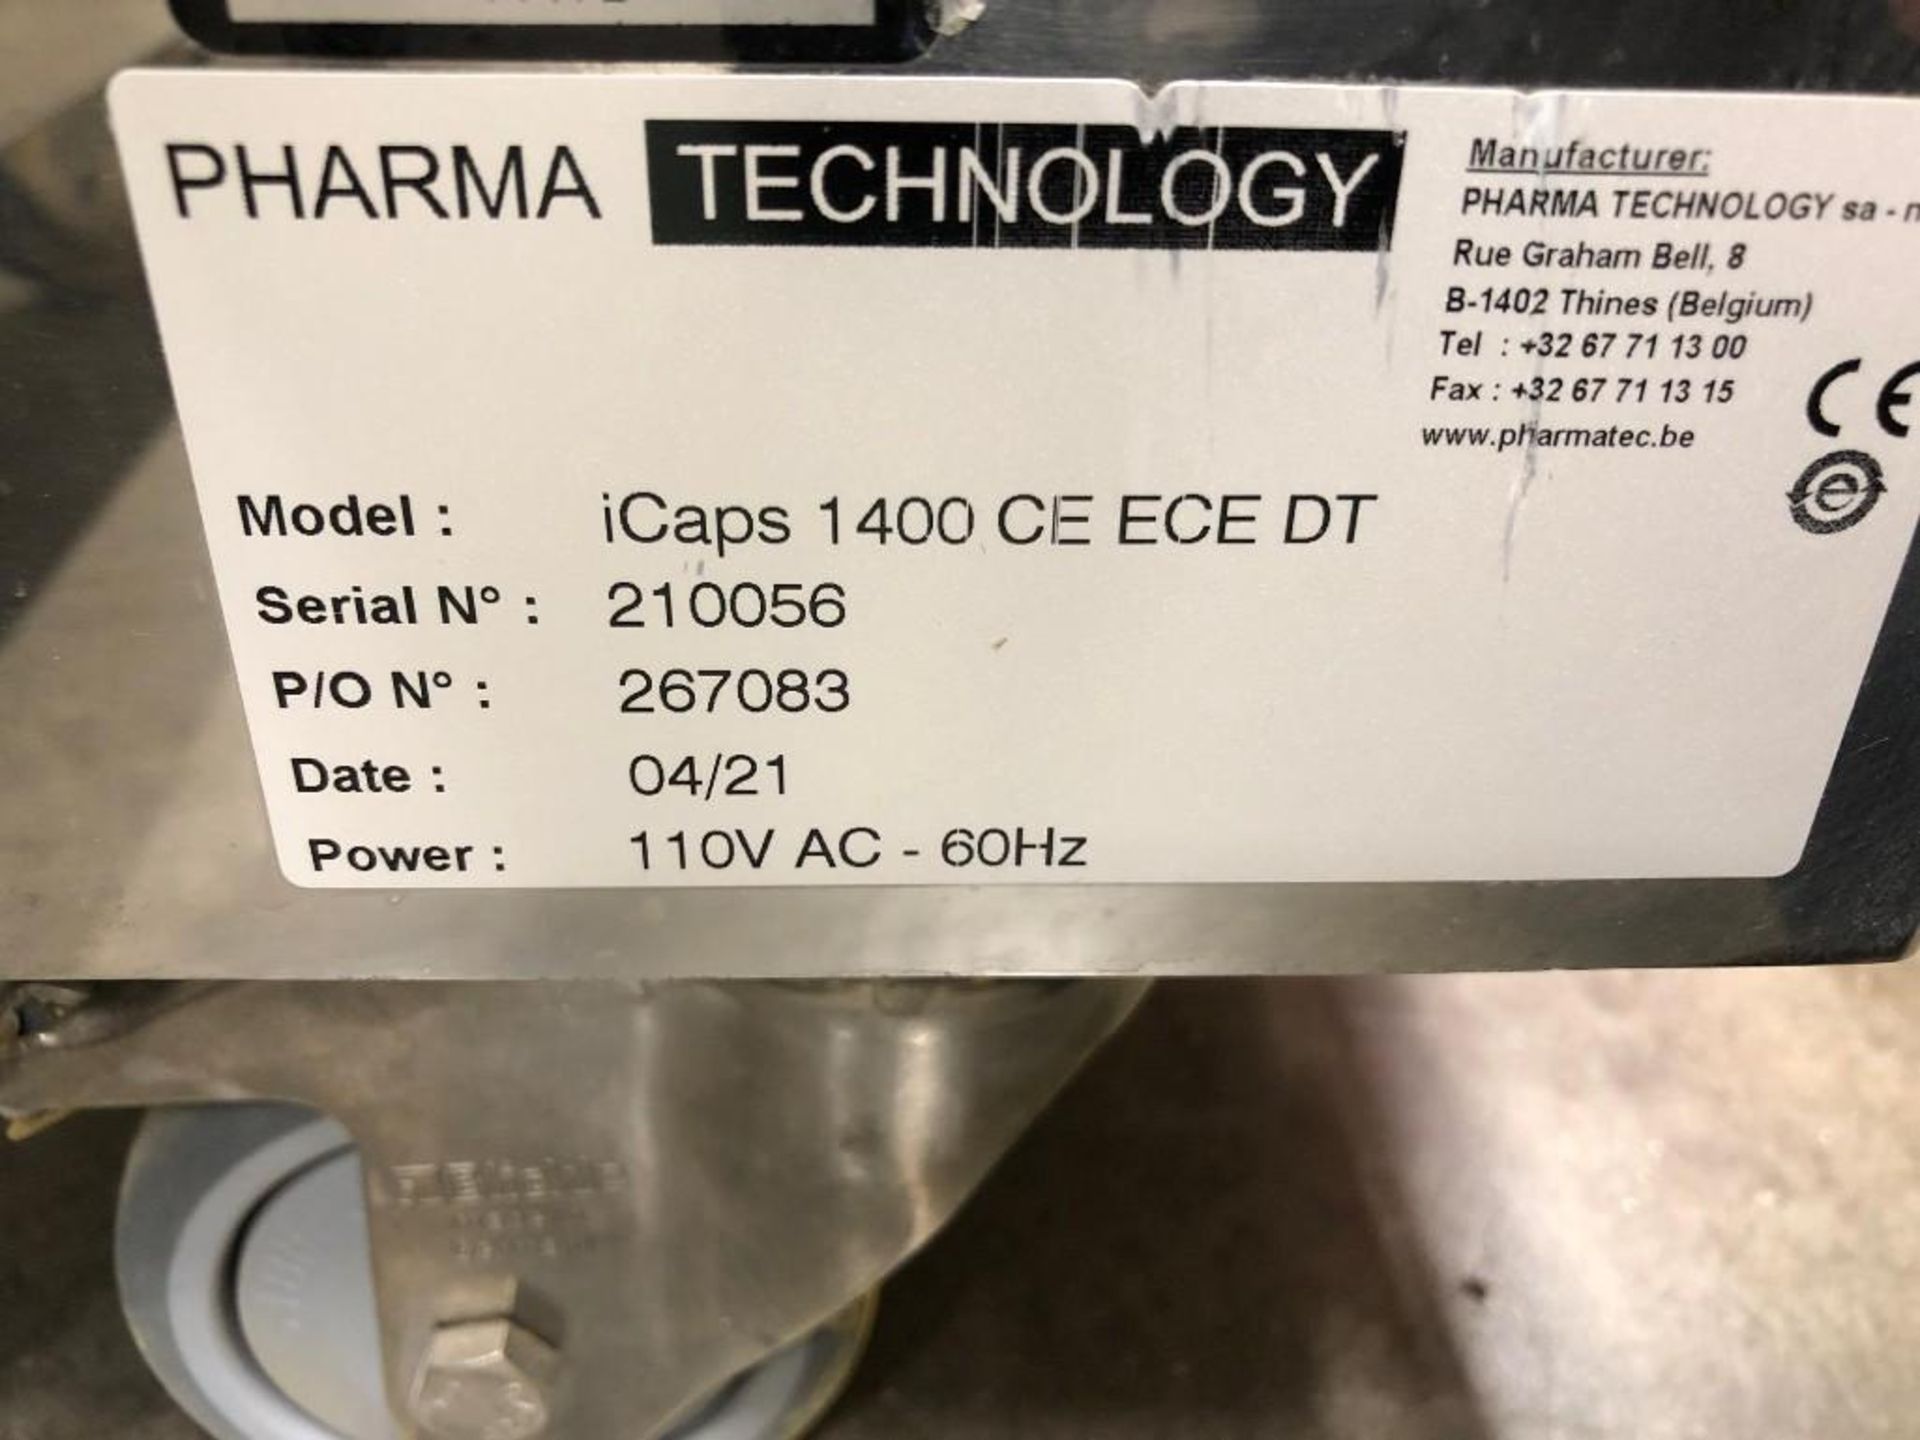 New! Pharma Technologies Vertical 5 Model iCaps 1400 CE ECE DT Capsule Polisher w/ Metal Check - Image 11 of 28